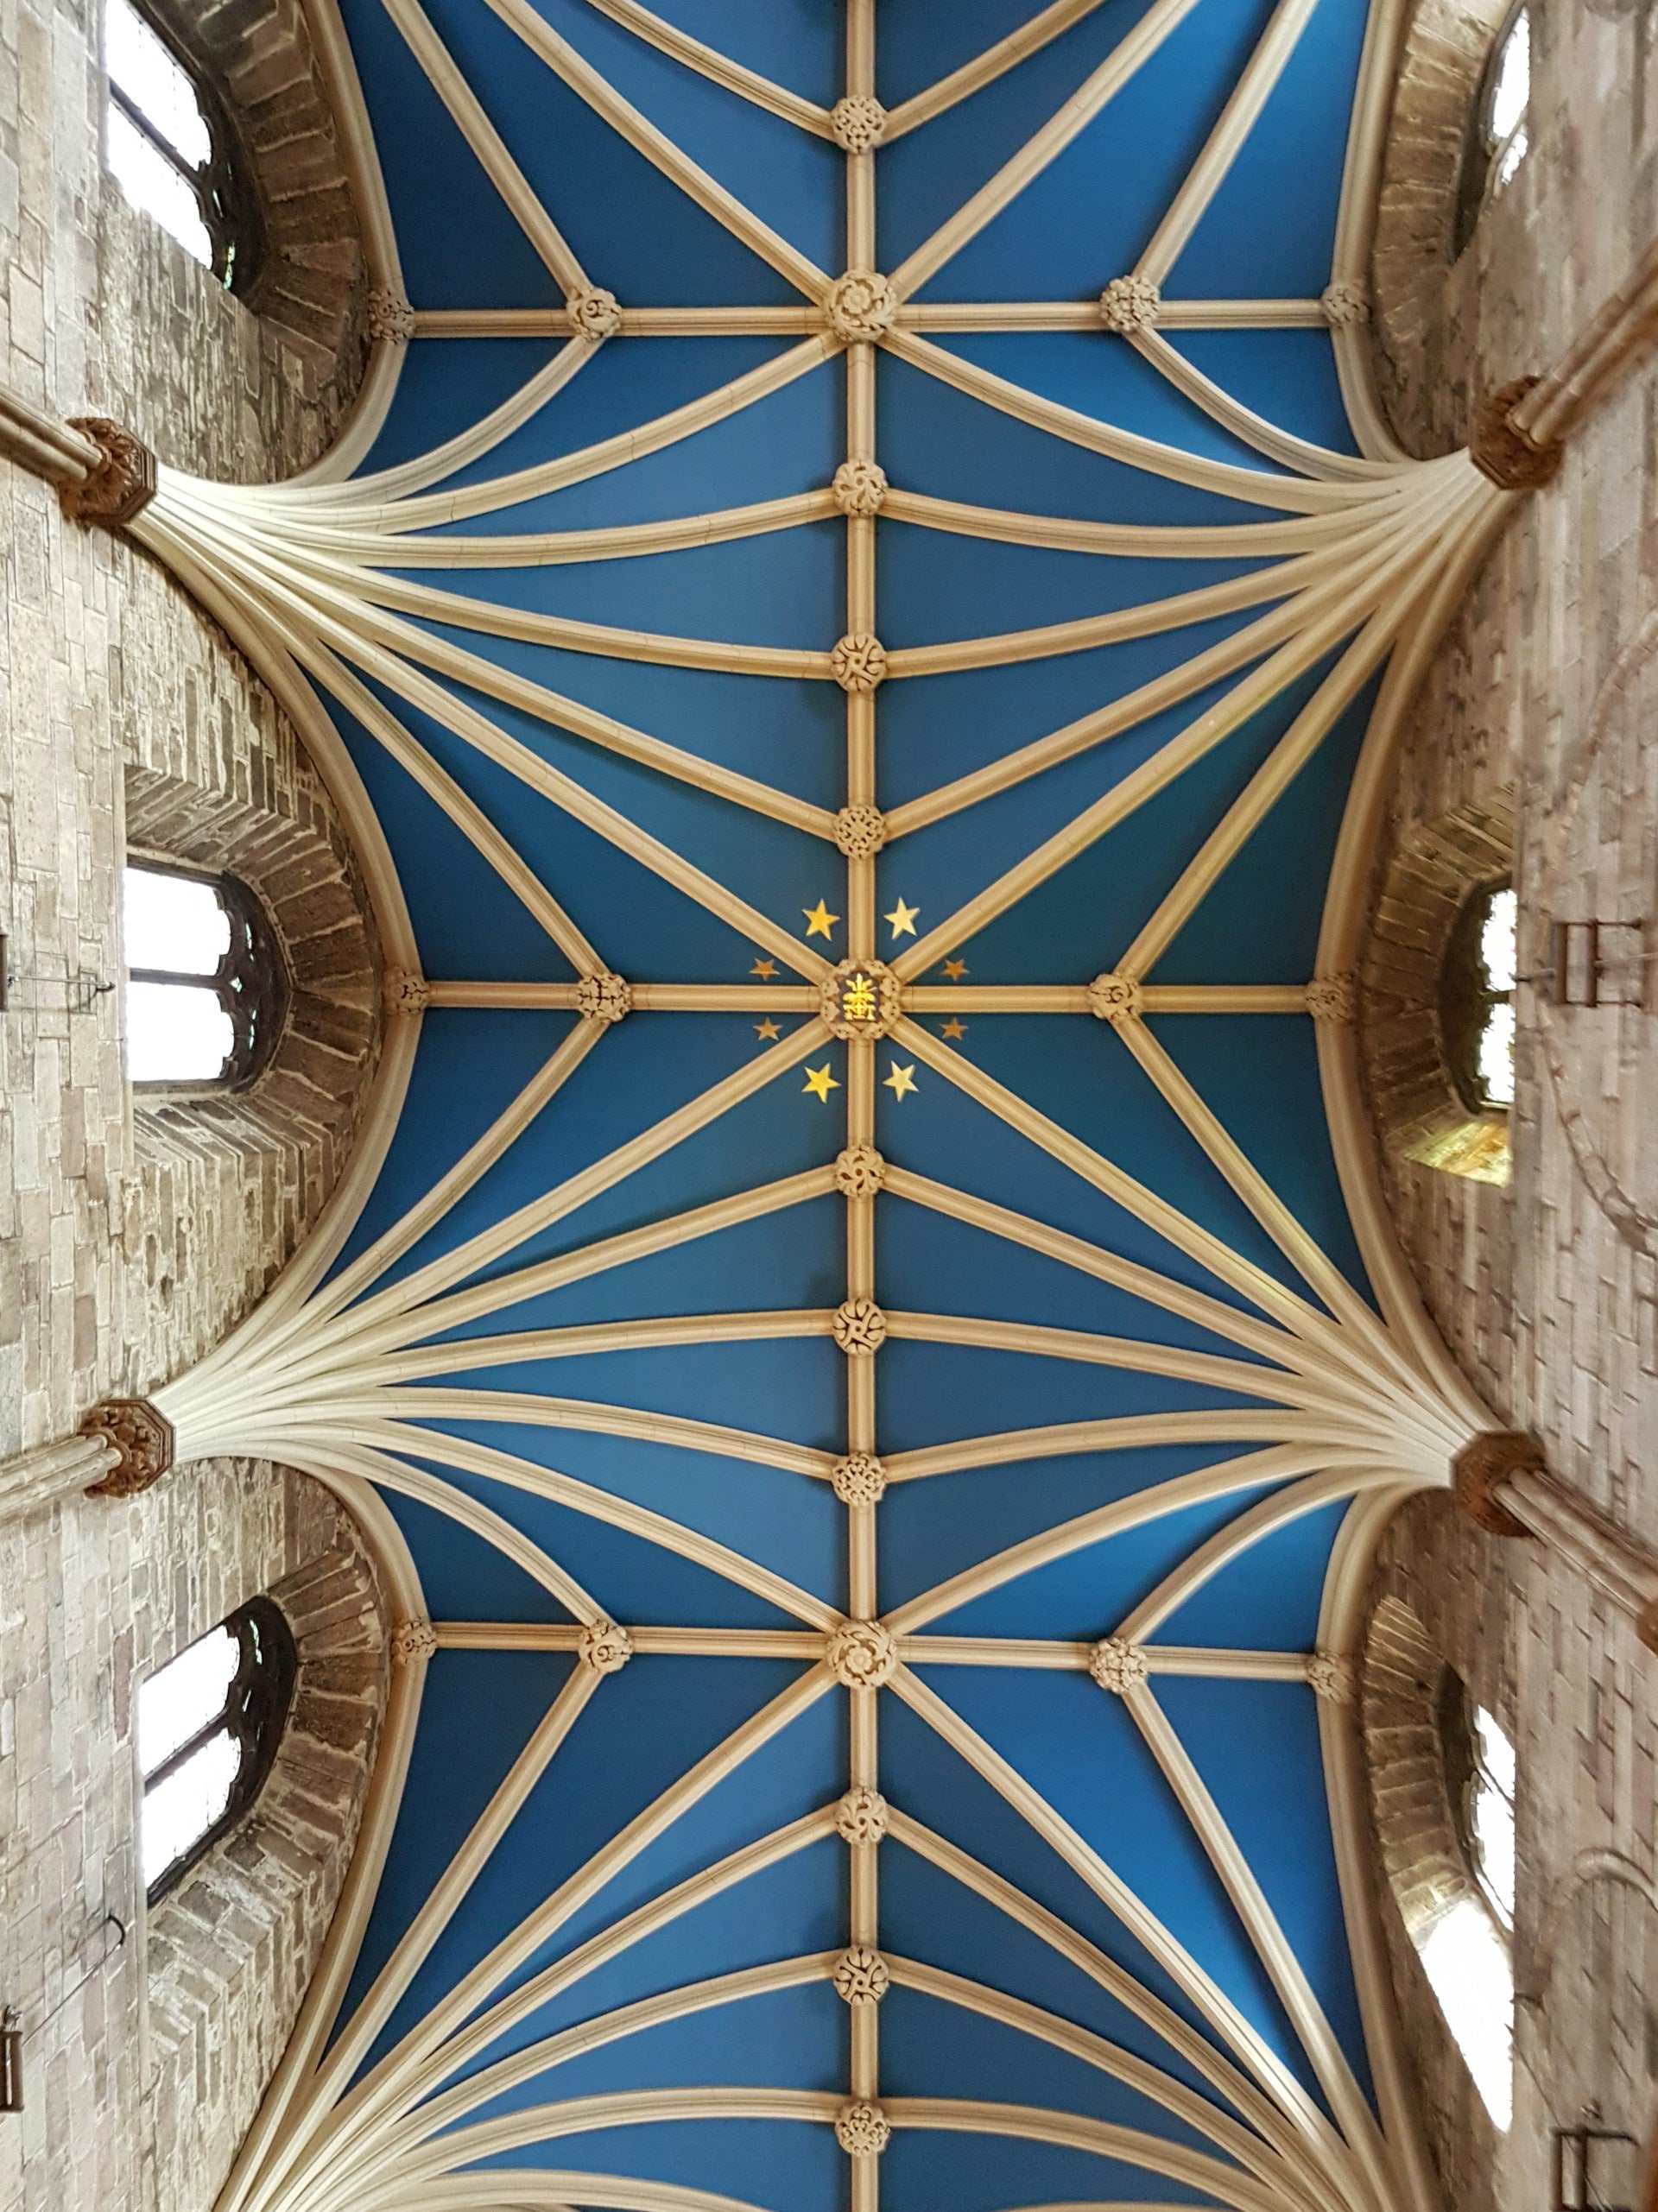 The blue ceiling of a cathedral with golden bars and arched windows.